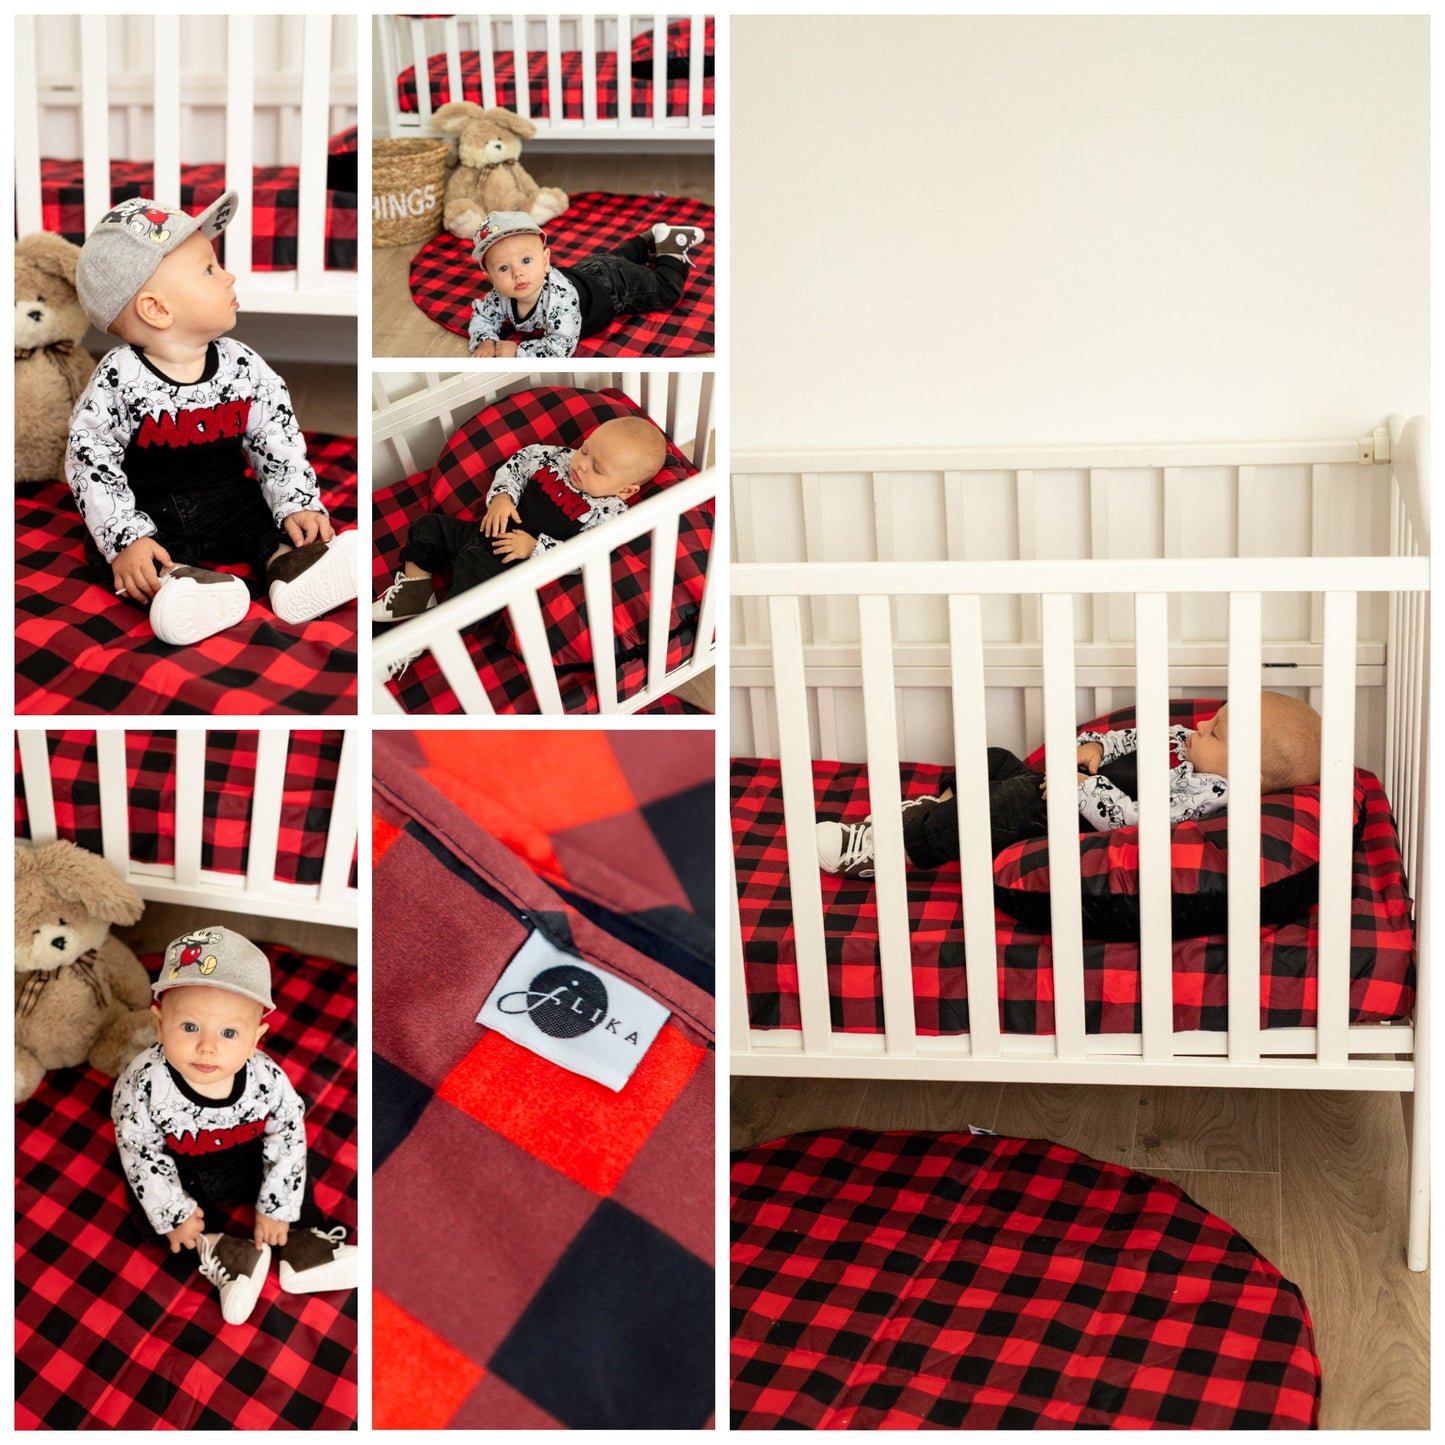 Shopping cart Covers for Baby, High Chair and Grocery Cover for Babies, Infants, Toddlers Trolley Seat for Boys and Girls (Buffalo Plaid)